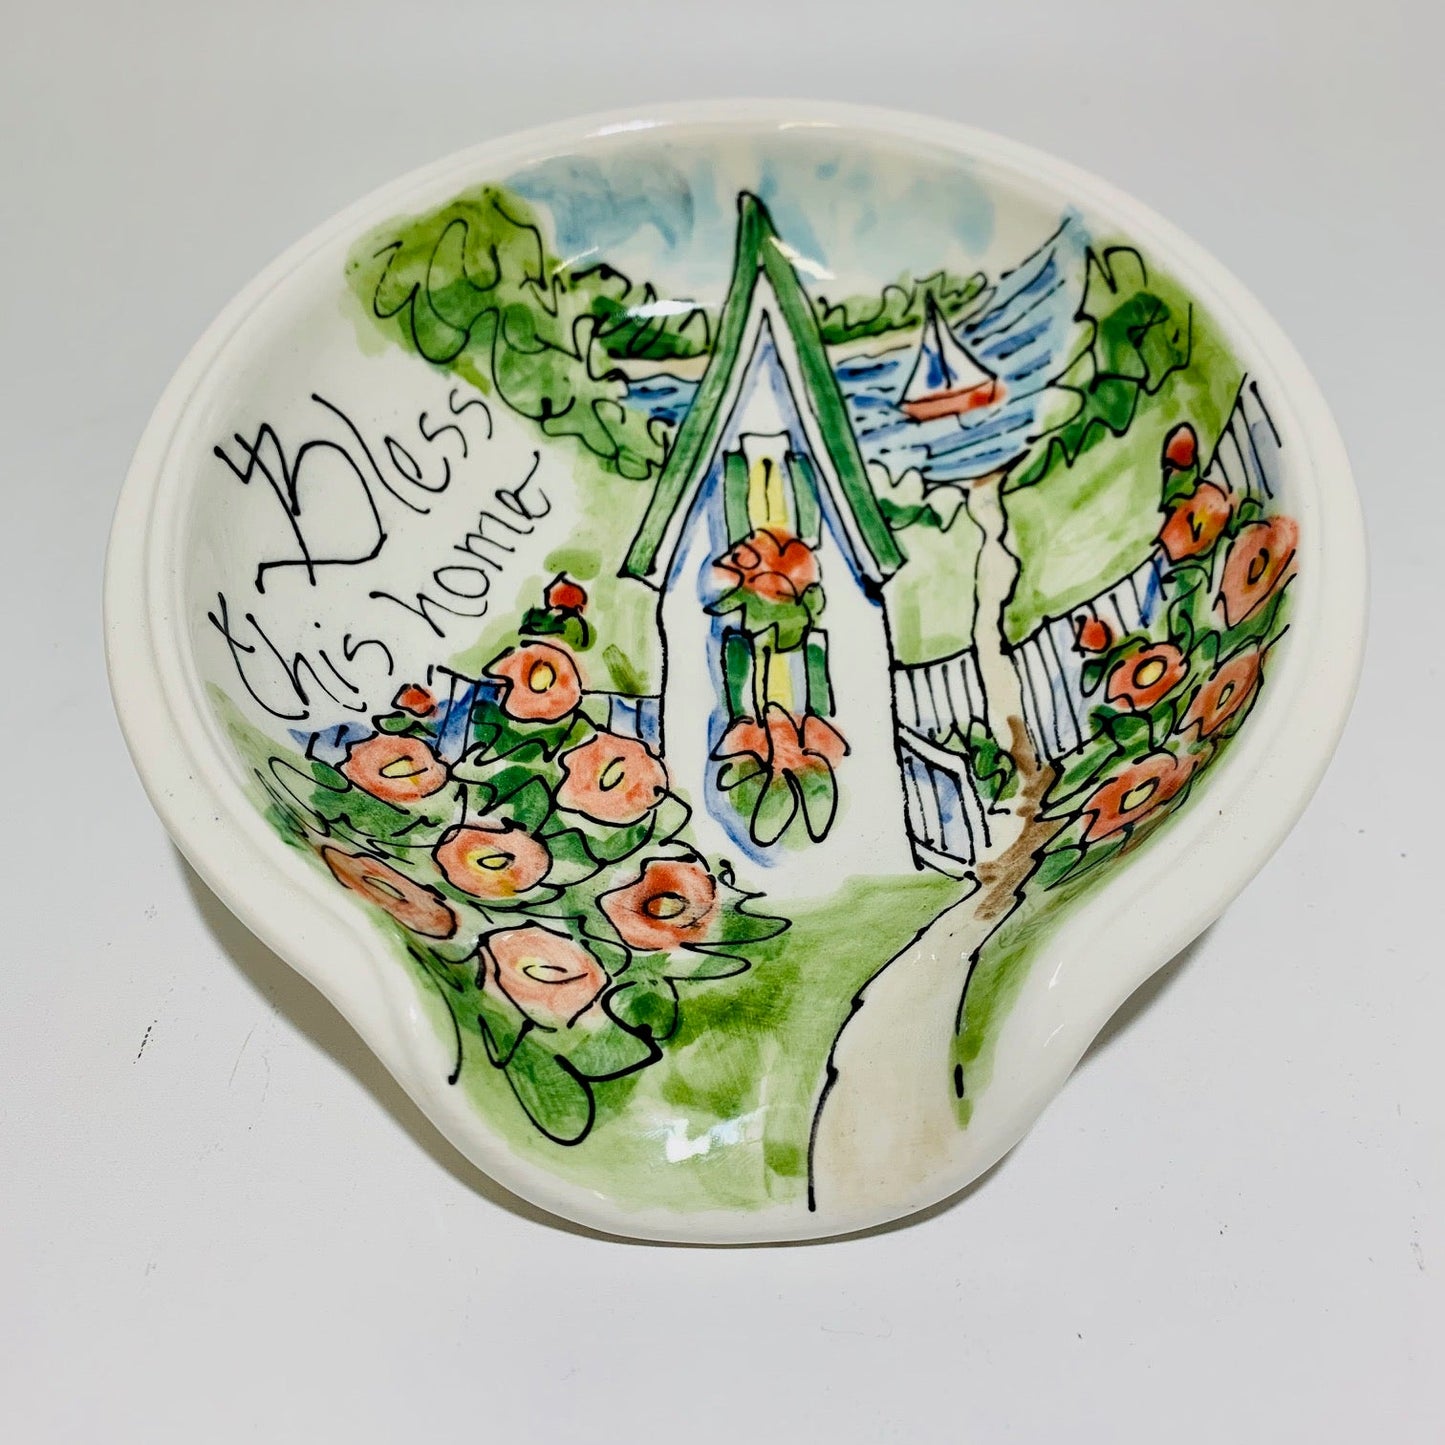 Spoon Rest Bless This Home🎨 Jan's Celebration Pottery🎨 Buy Art at Carolina Creations Gallery in Downtown New Bern🎨